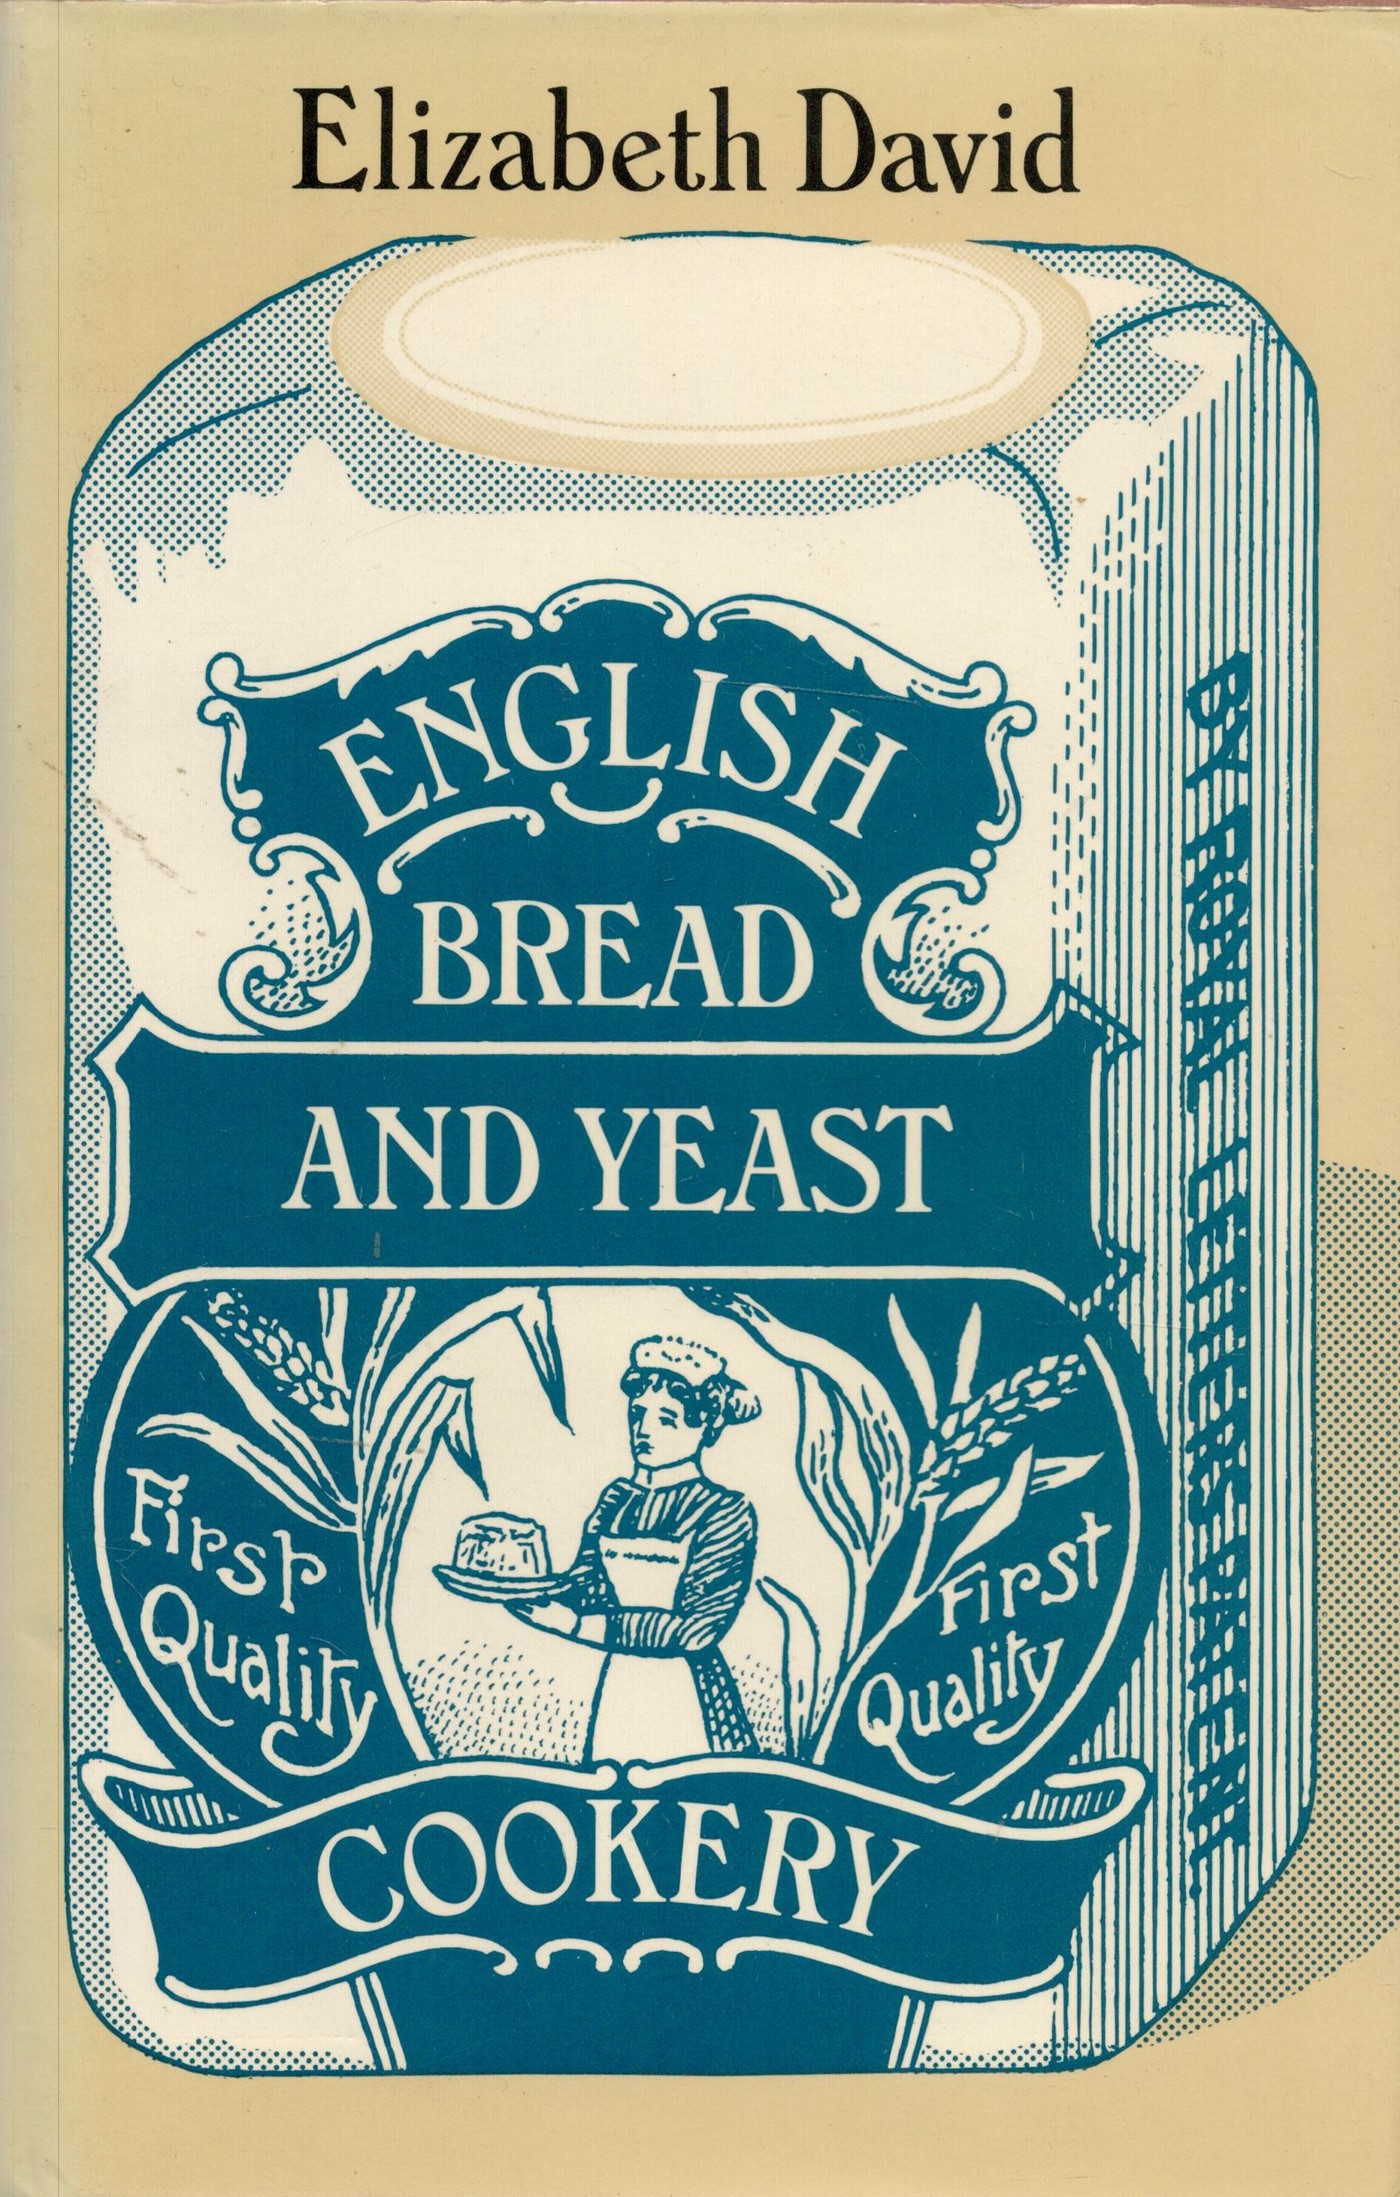 English Bread and Yeast Cookery by Elizabeth David Hardback Book 1977 First Edition published by